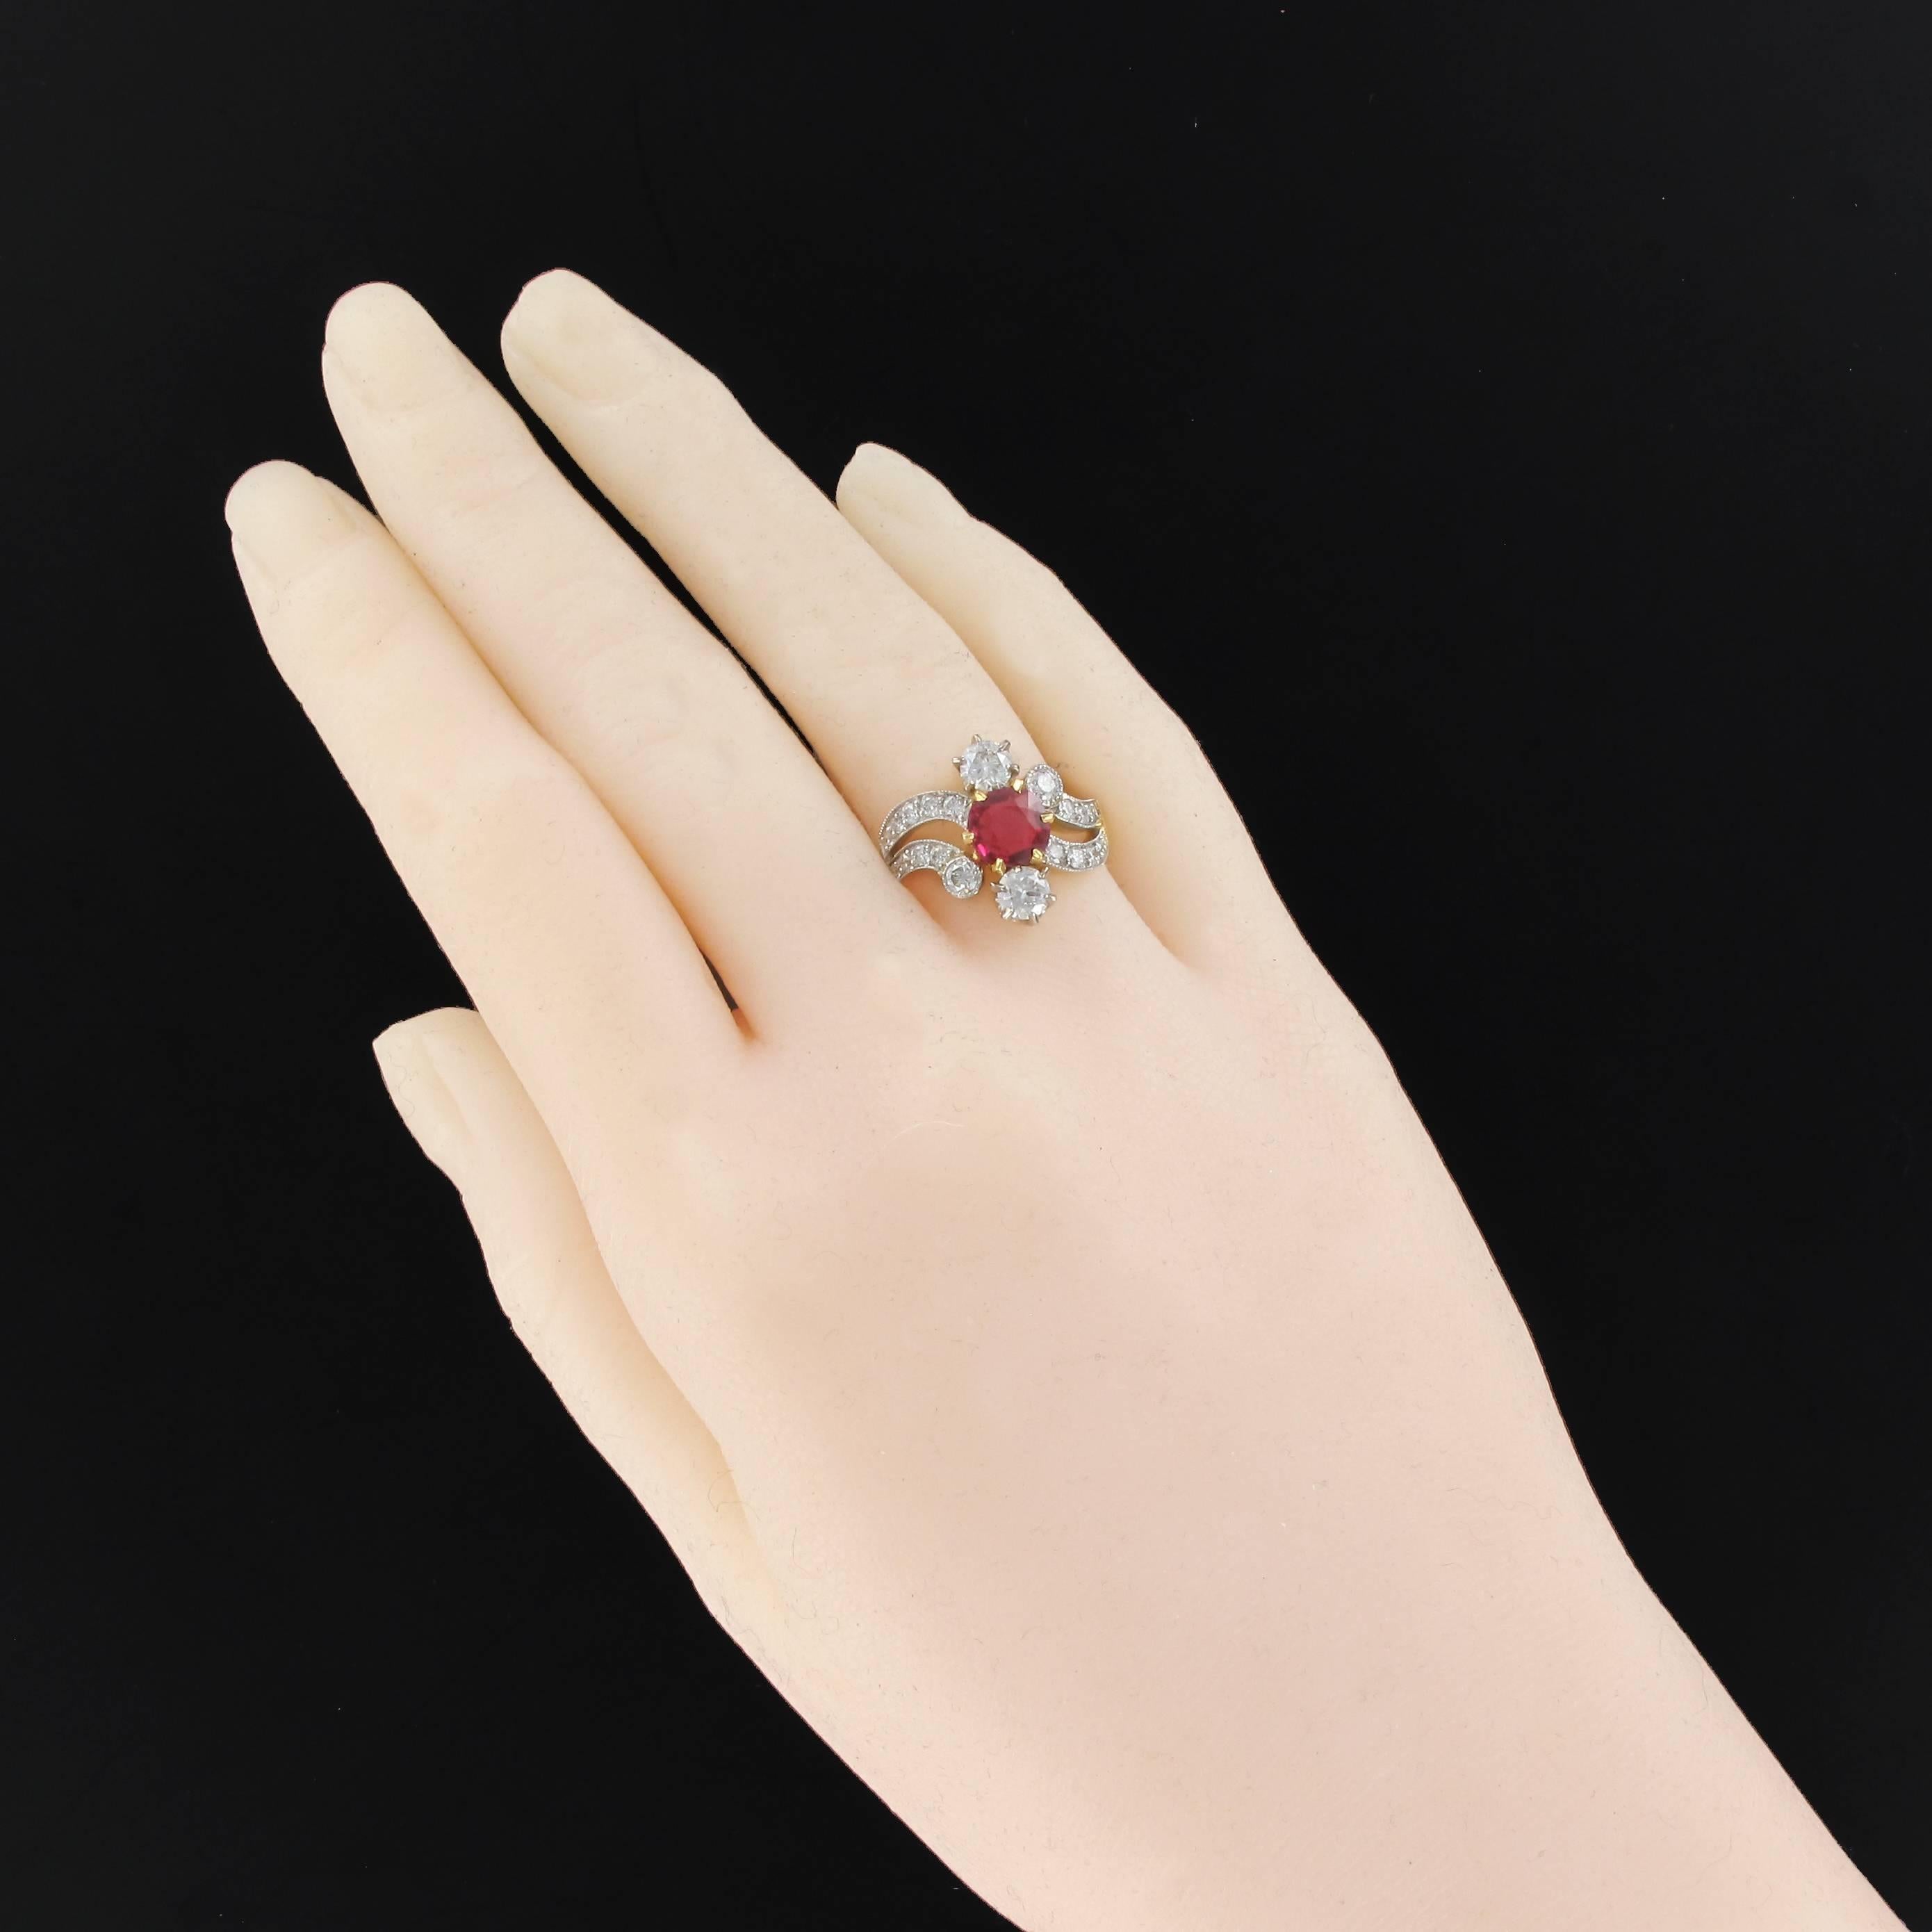 Ring in 18 carats yellow gold, eagle head hallmark and platinum, dog's head hallmark.
Lovely and feminine platinum gold ring, it is set with claws on its top with a cushion-cut ruby, 2 brilliant-cut diamonds and 2 other brilliant-cut diamonds set